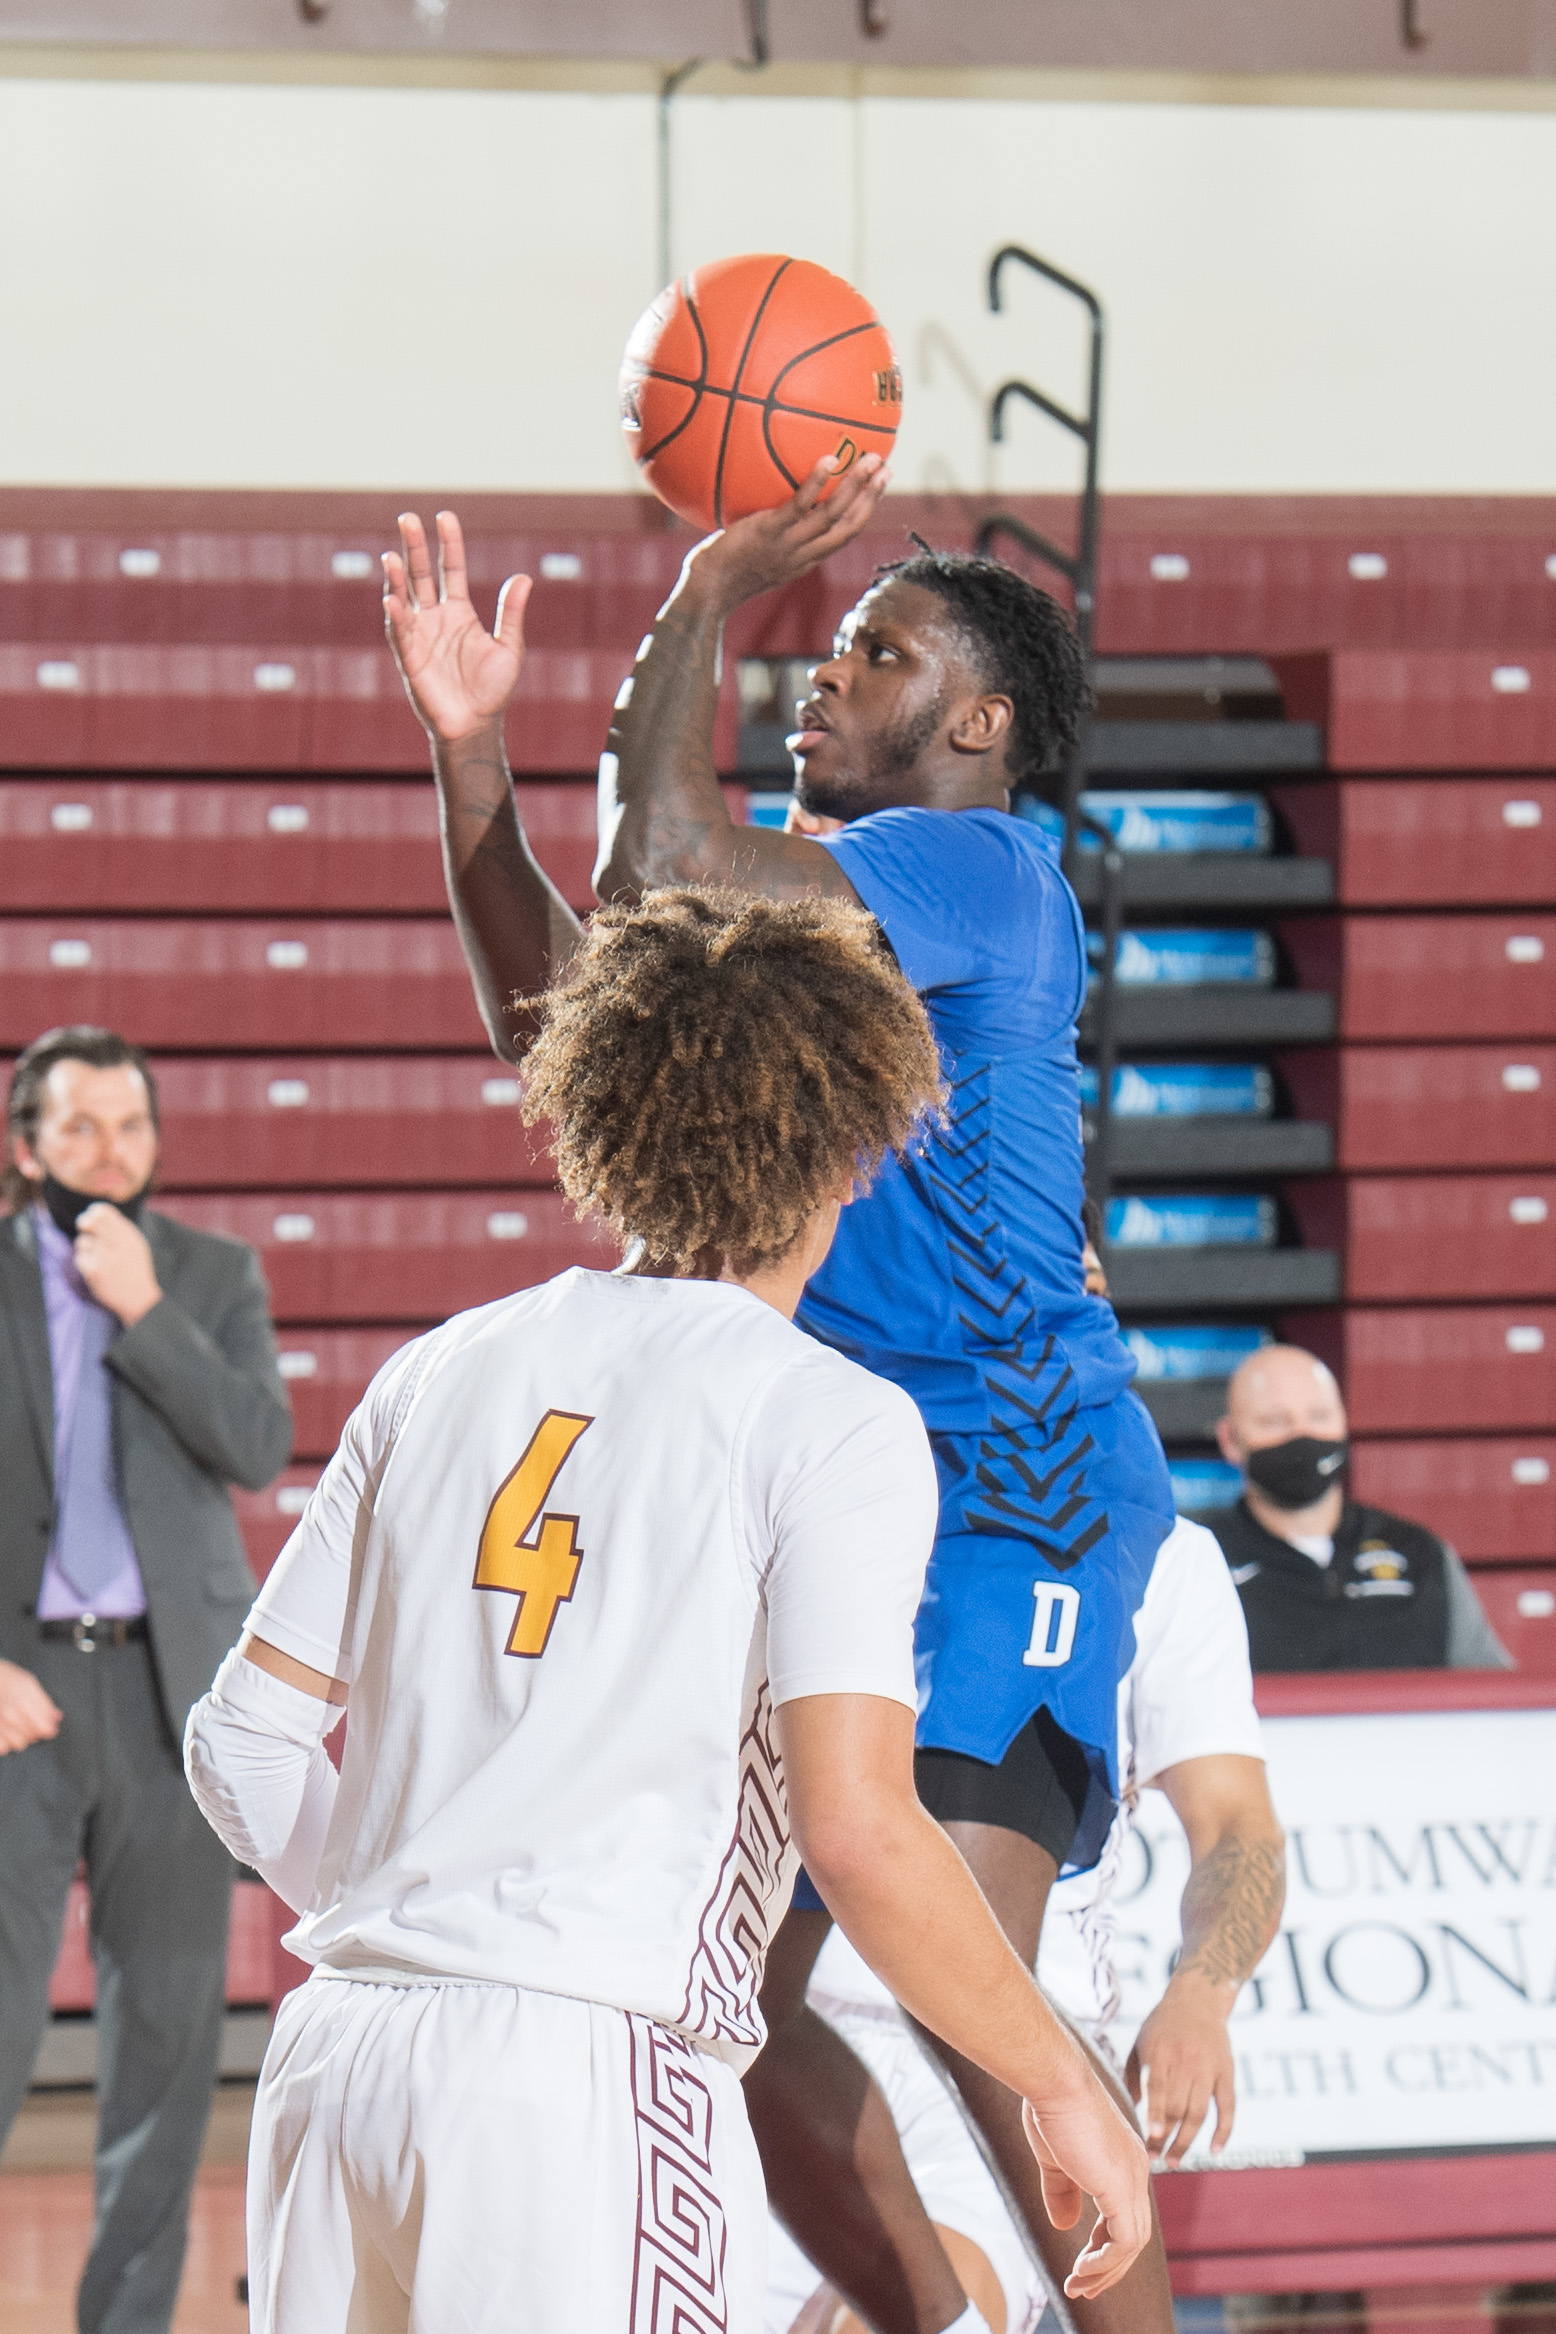 DMACC men's basketball team tops ILCC in battle of ranked teams